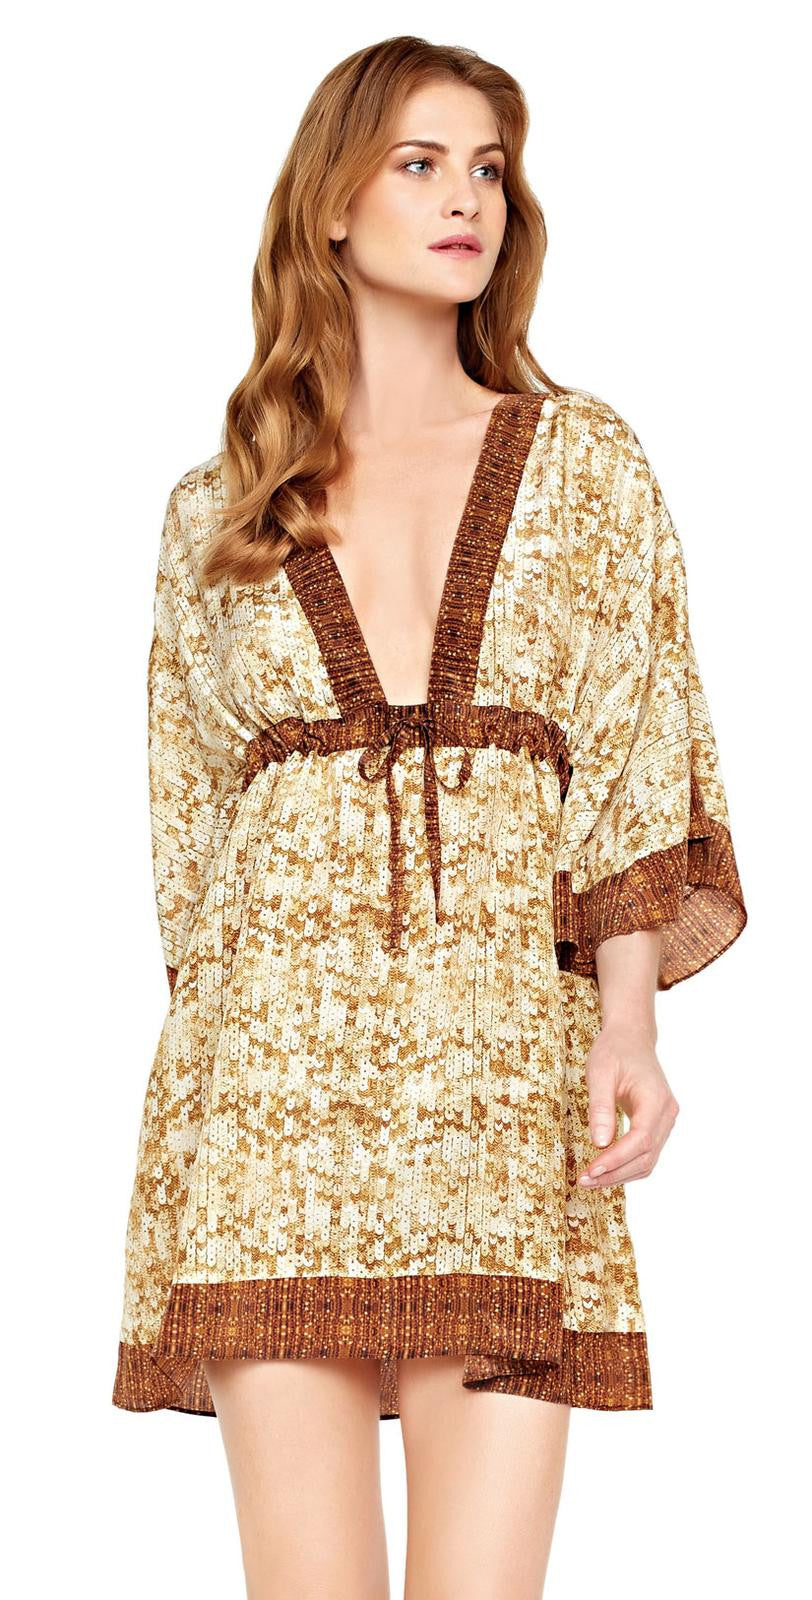 L'Amour 100% Silk Caftan Swim Cover Up - forENVY